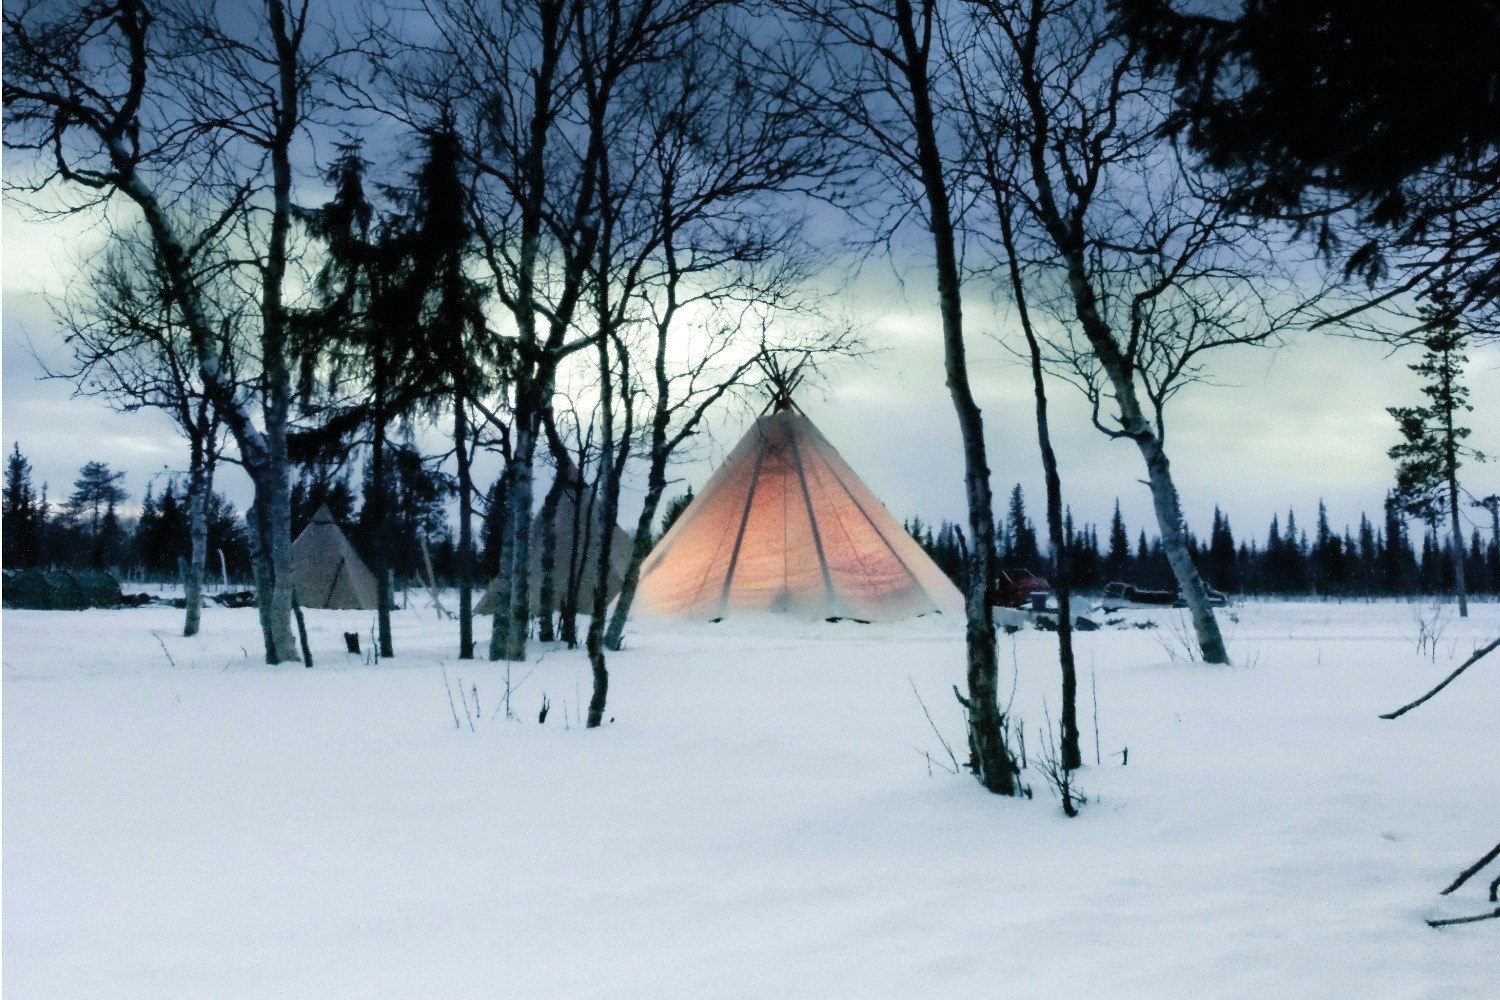 Glow of a traditional Sami tent (lavvu) in snow covered forest.